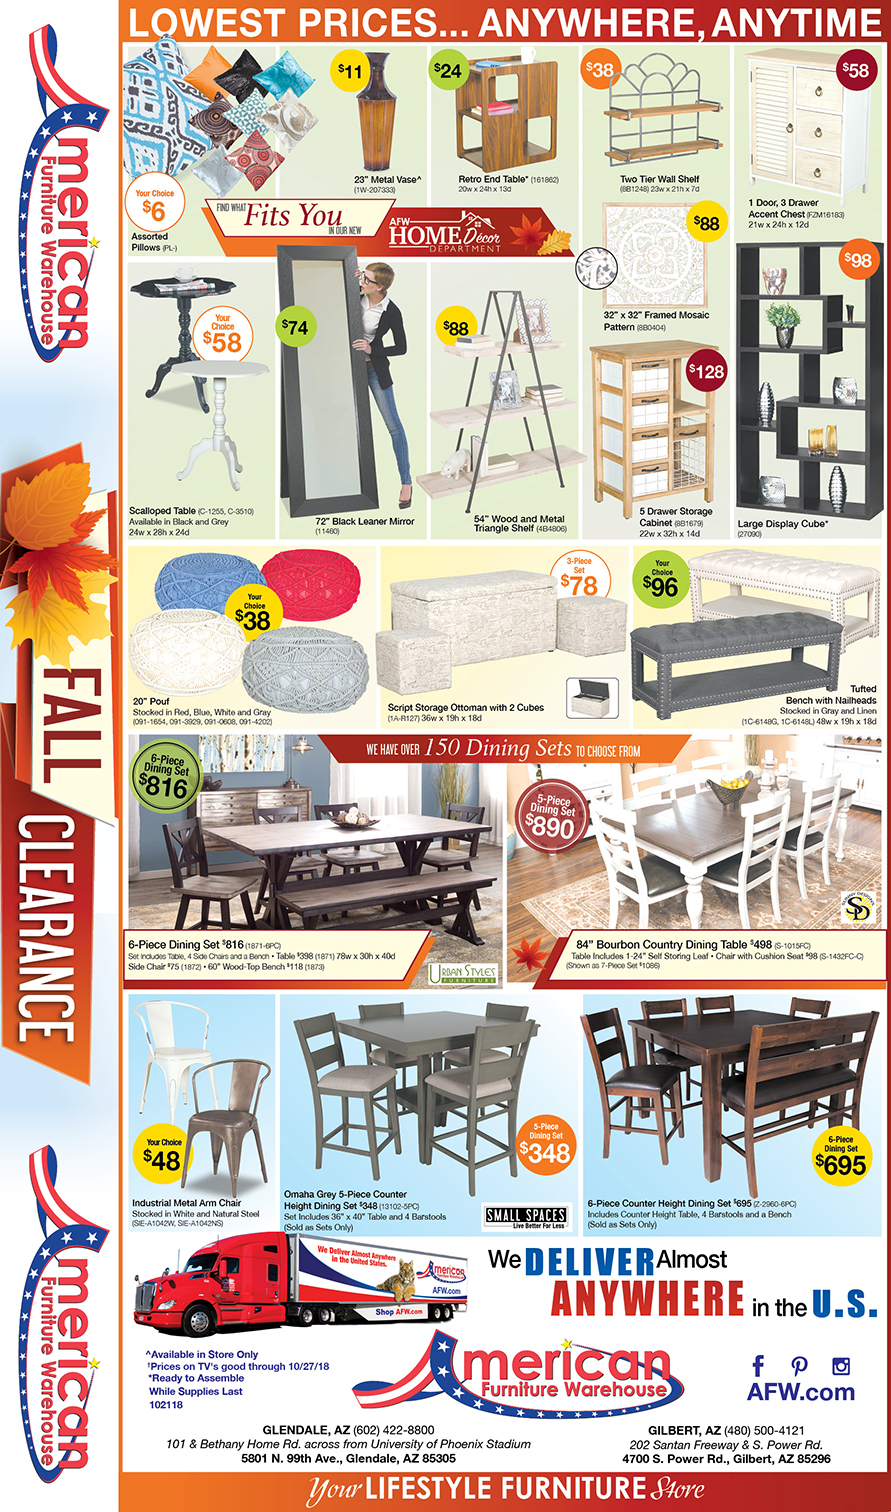 Fall Clearance Event Savings Arizona’s Living Room Furniture Newspaper Ad | Lowest Prices on Furniture